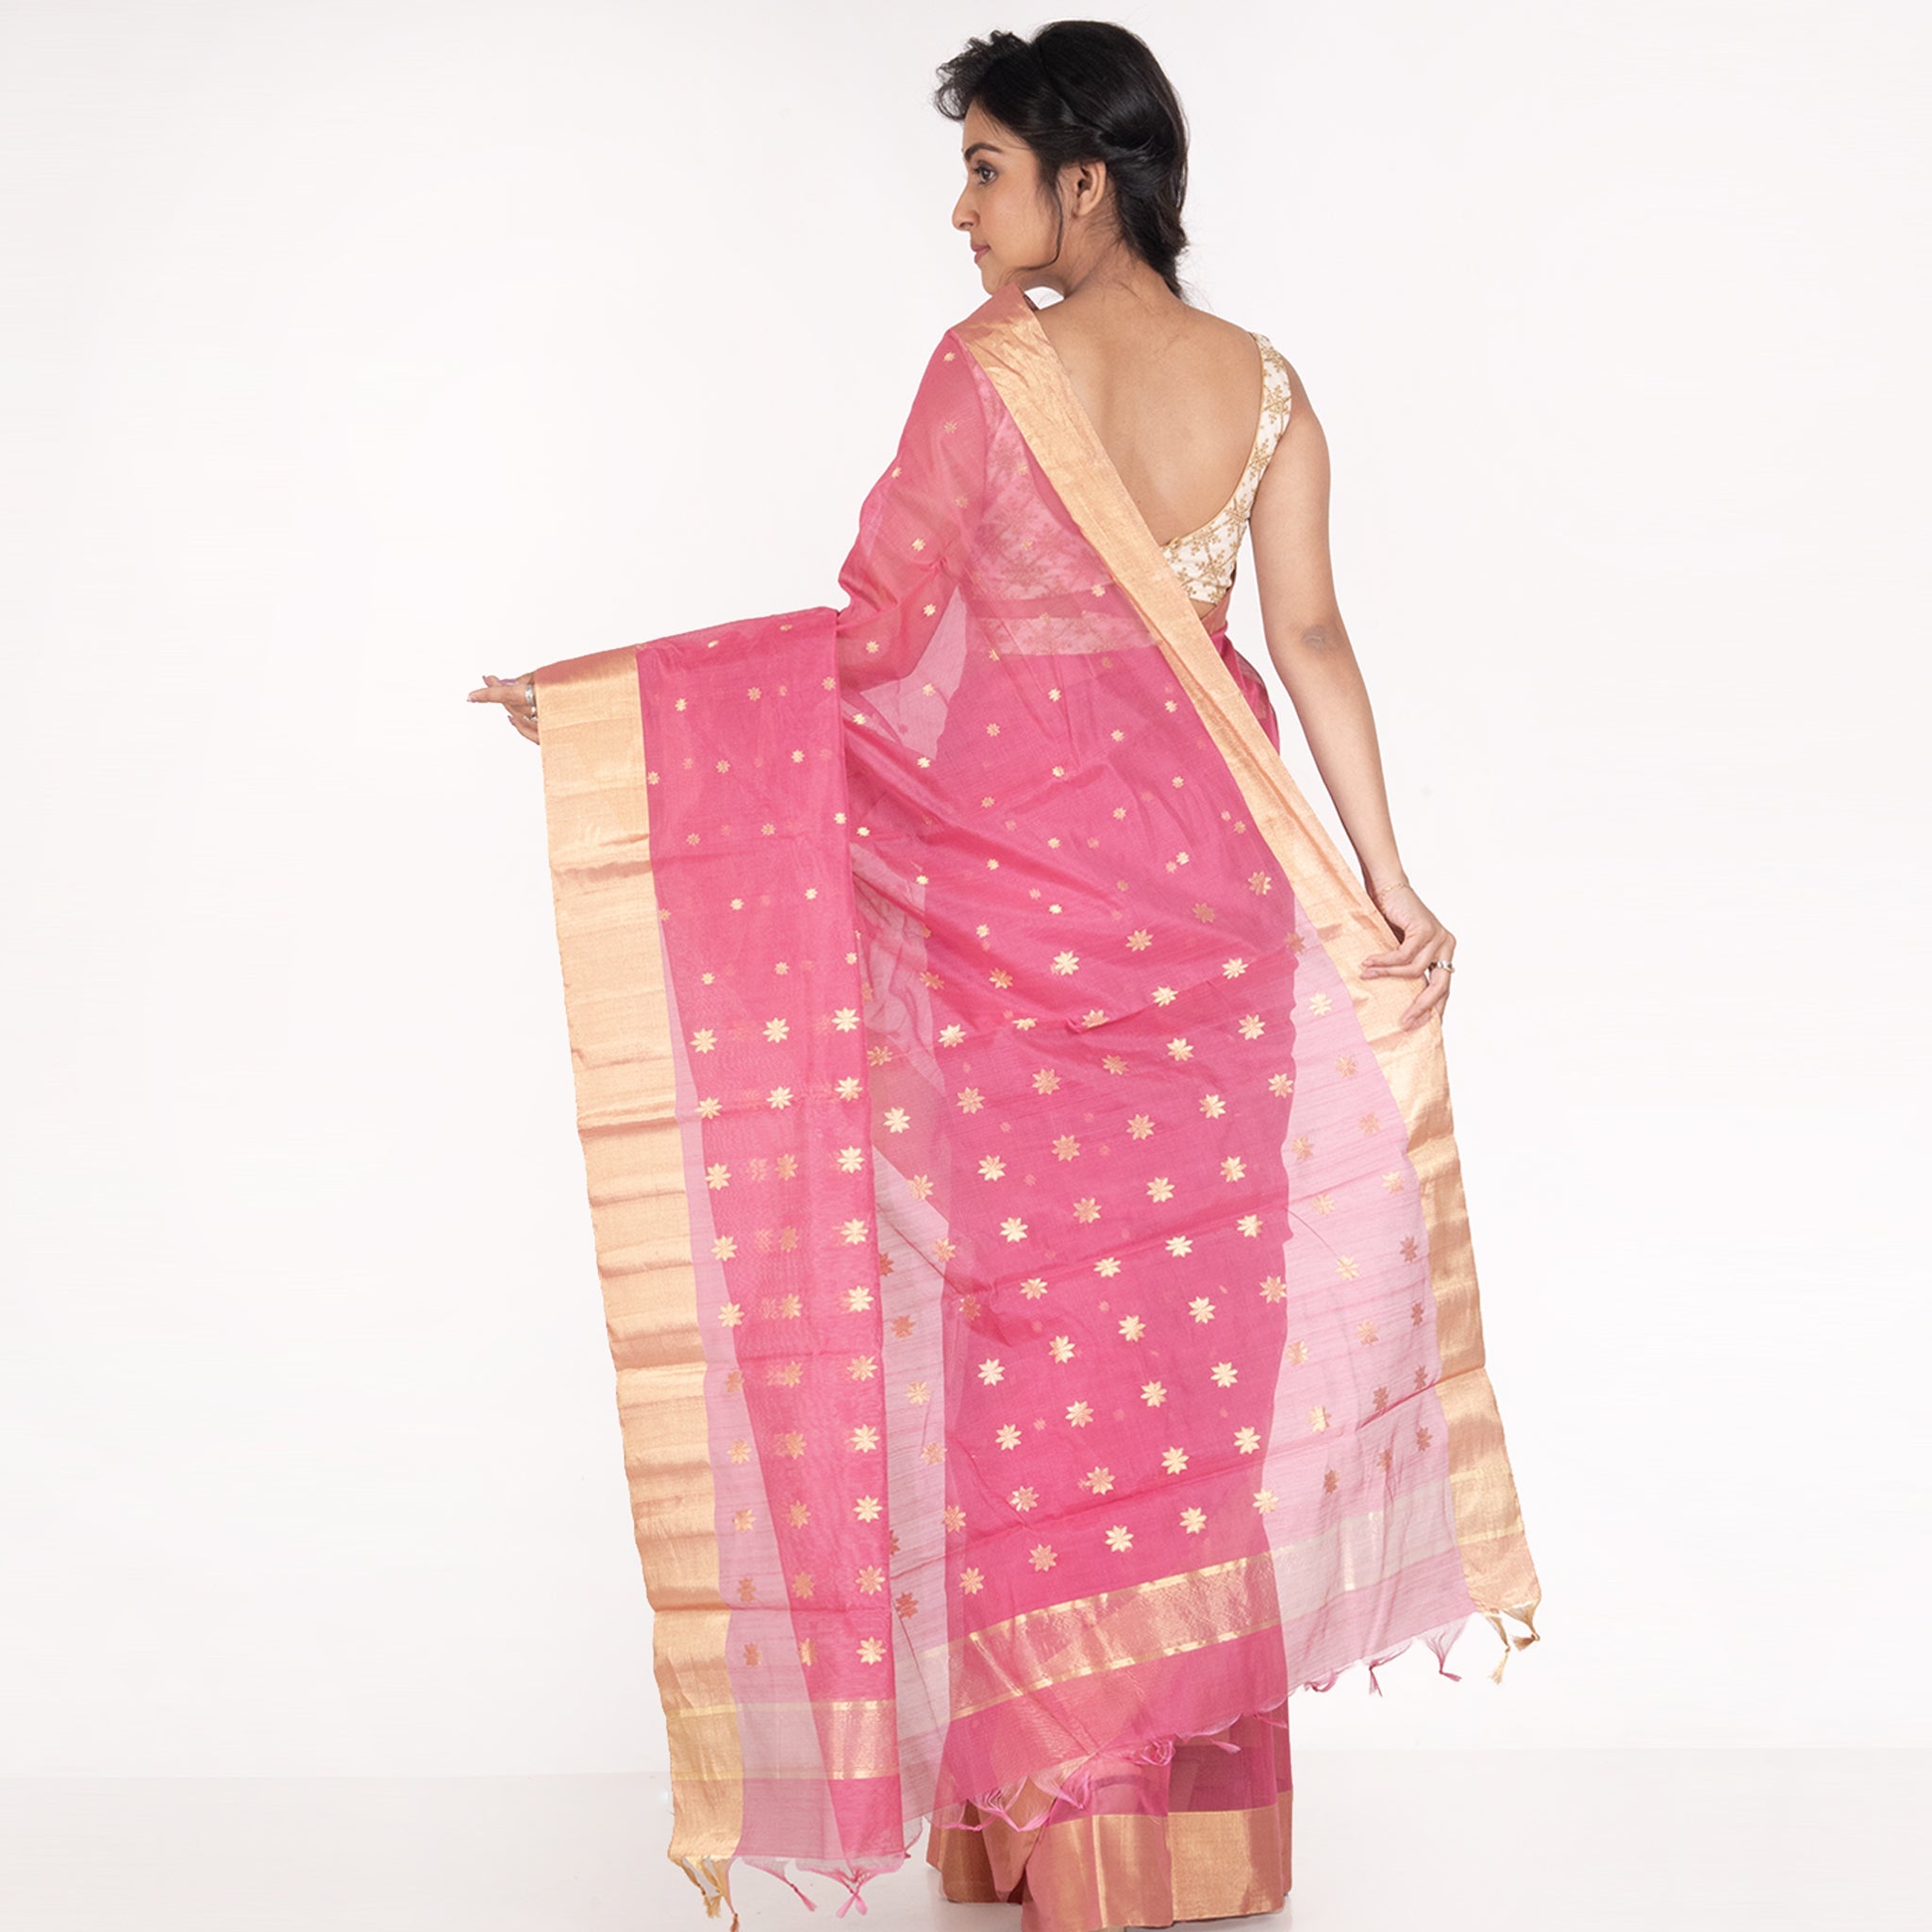 Women's Old Rose Pink Pure Chanderi Silk Saree With Contrasting Border And Booti - Boveee